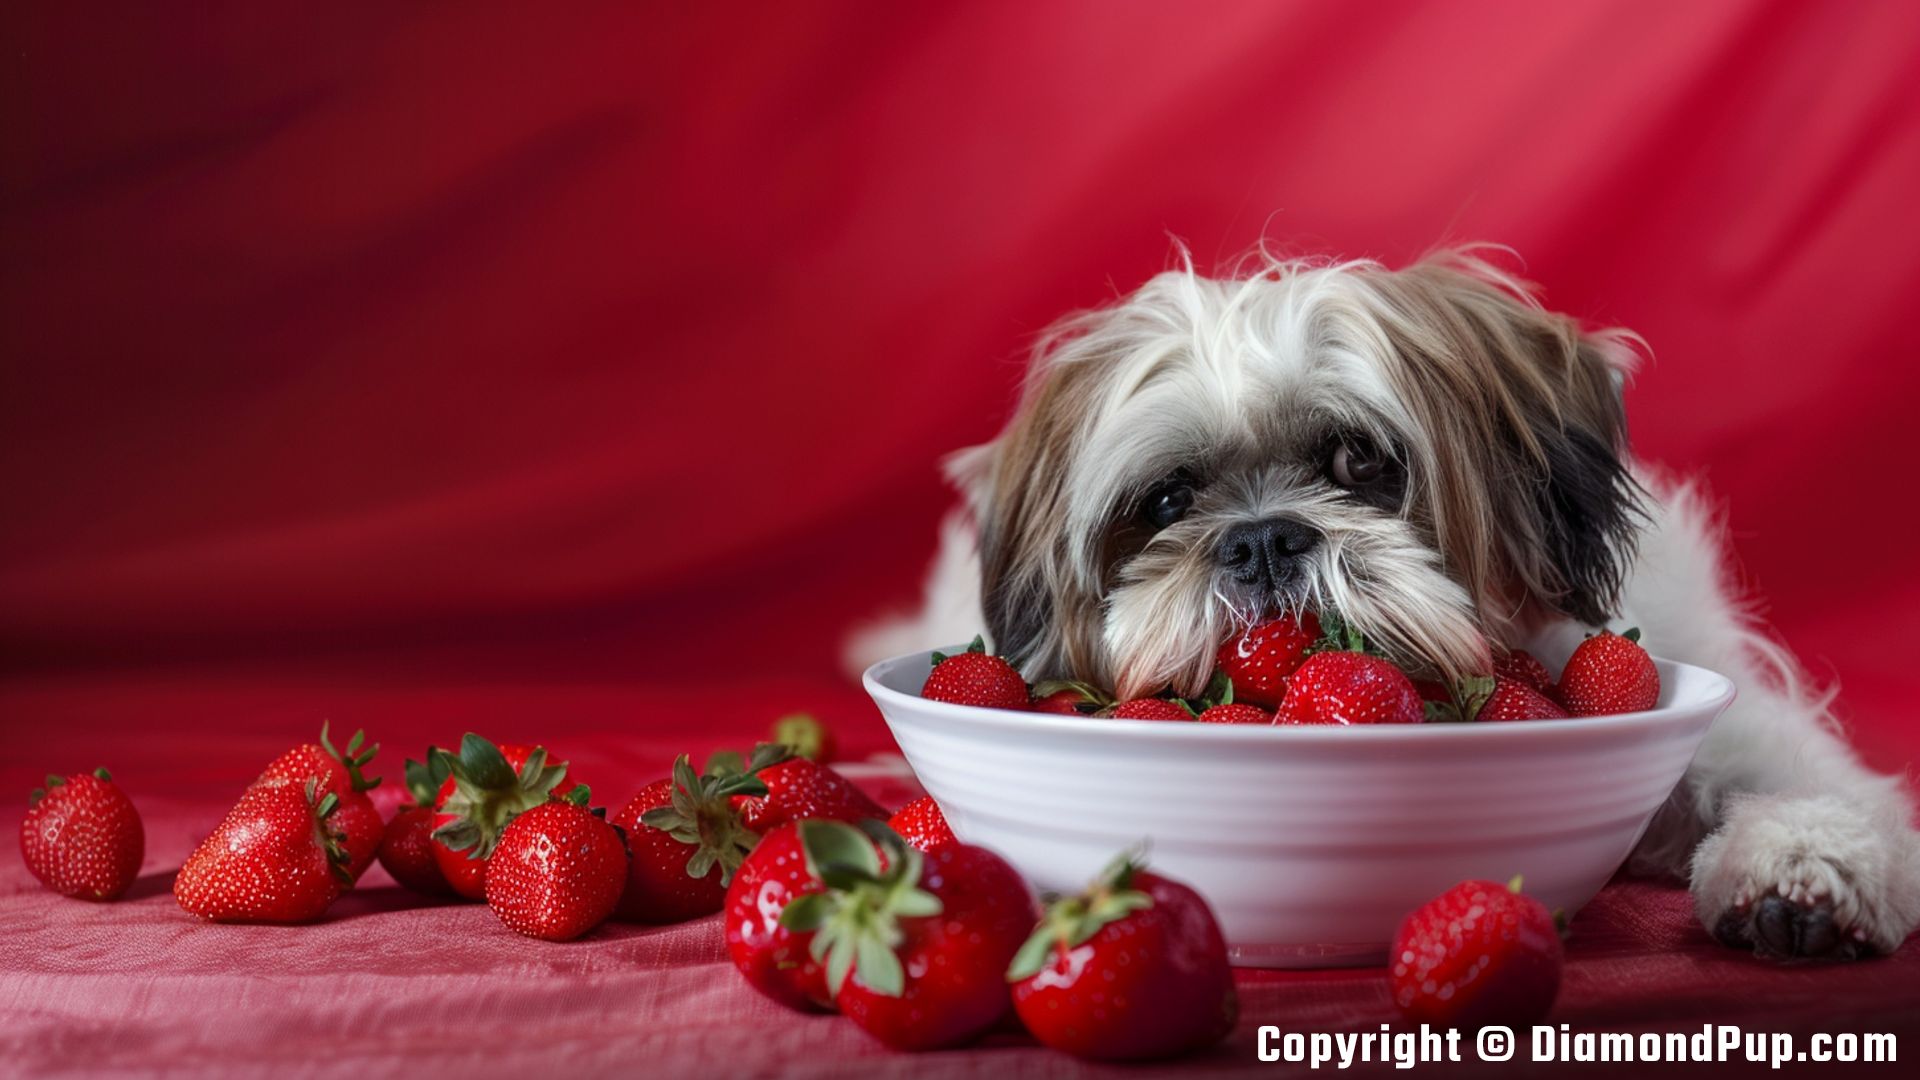 Photograph of a Happy Shih Tzu Eating Strawberries